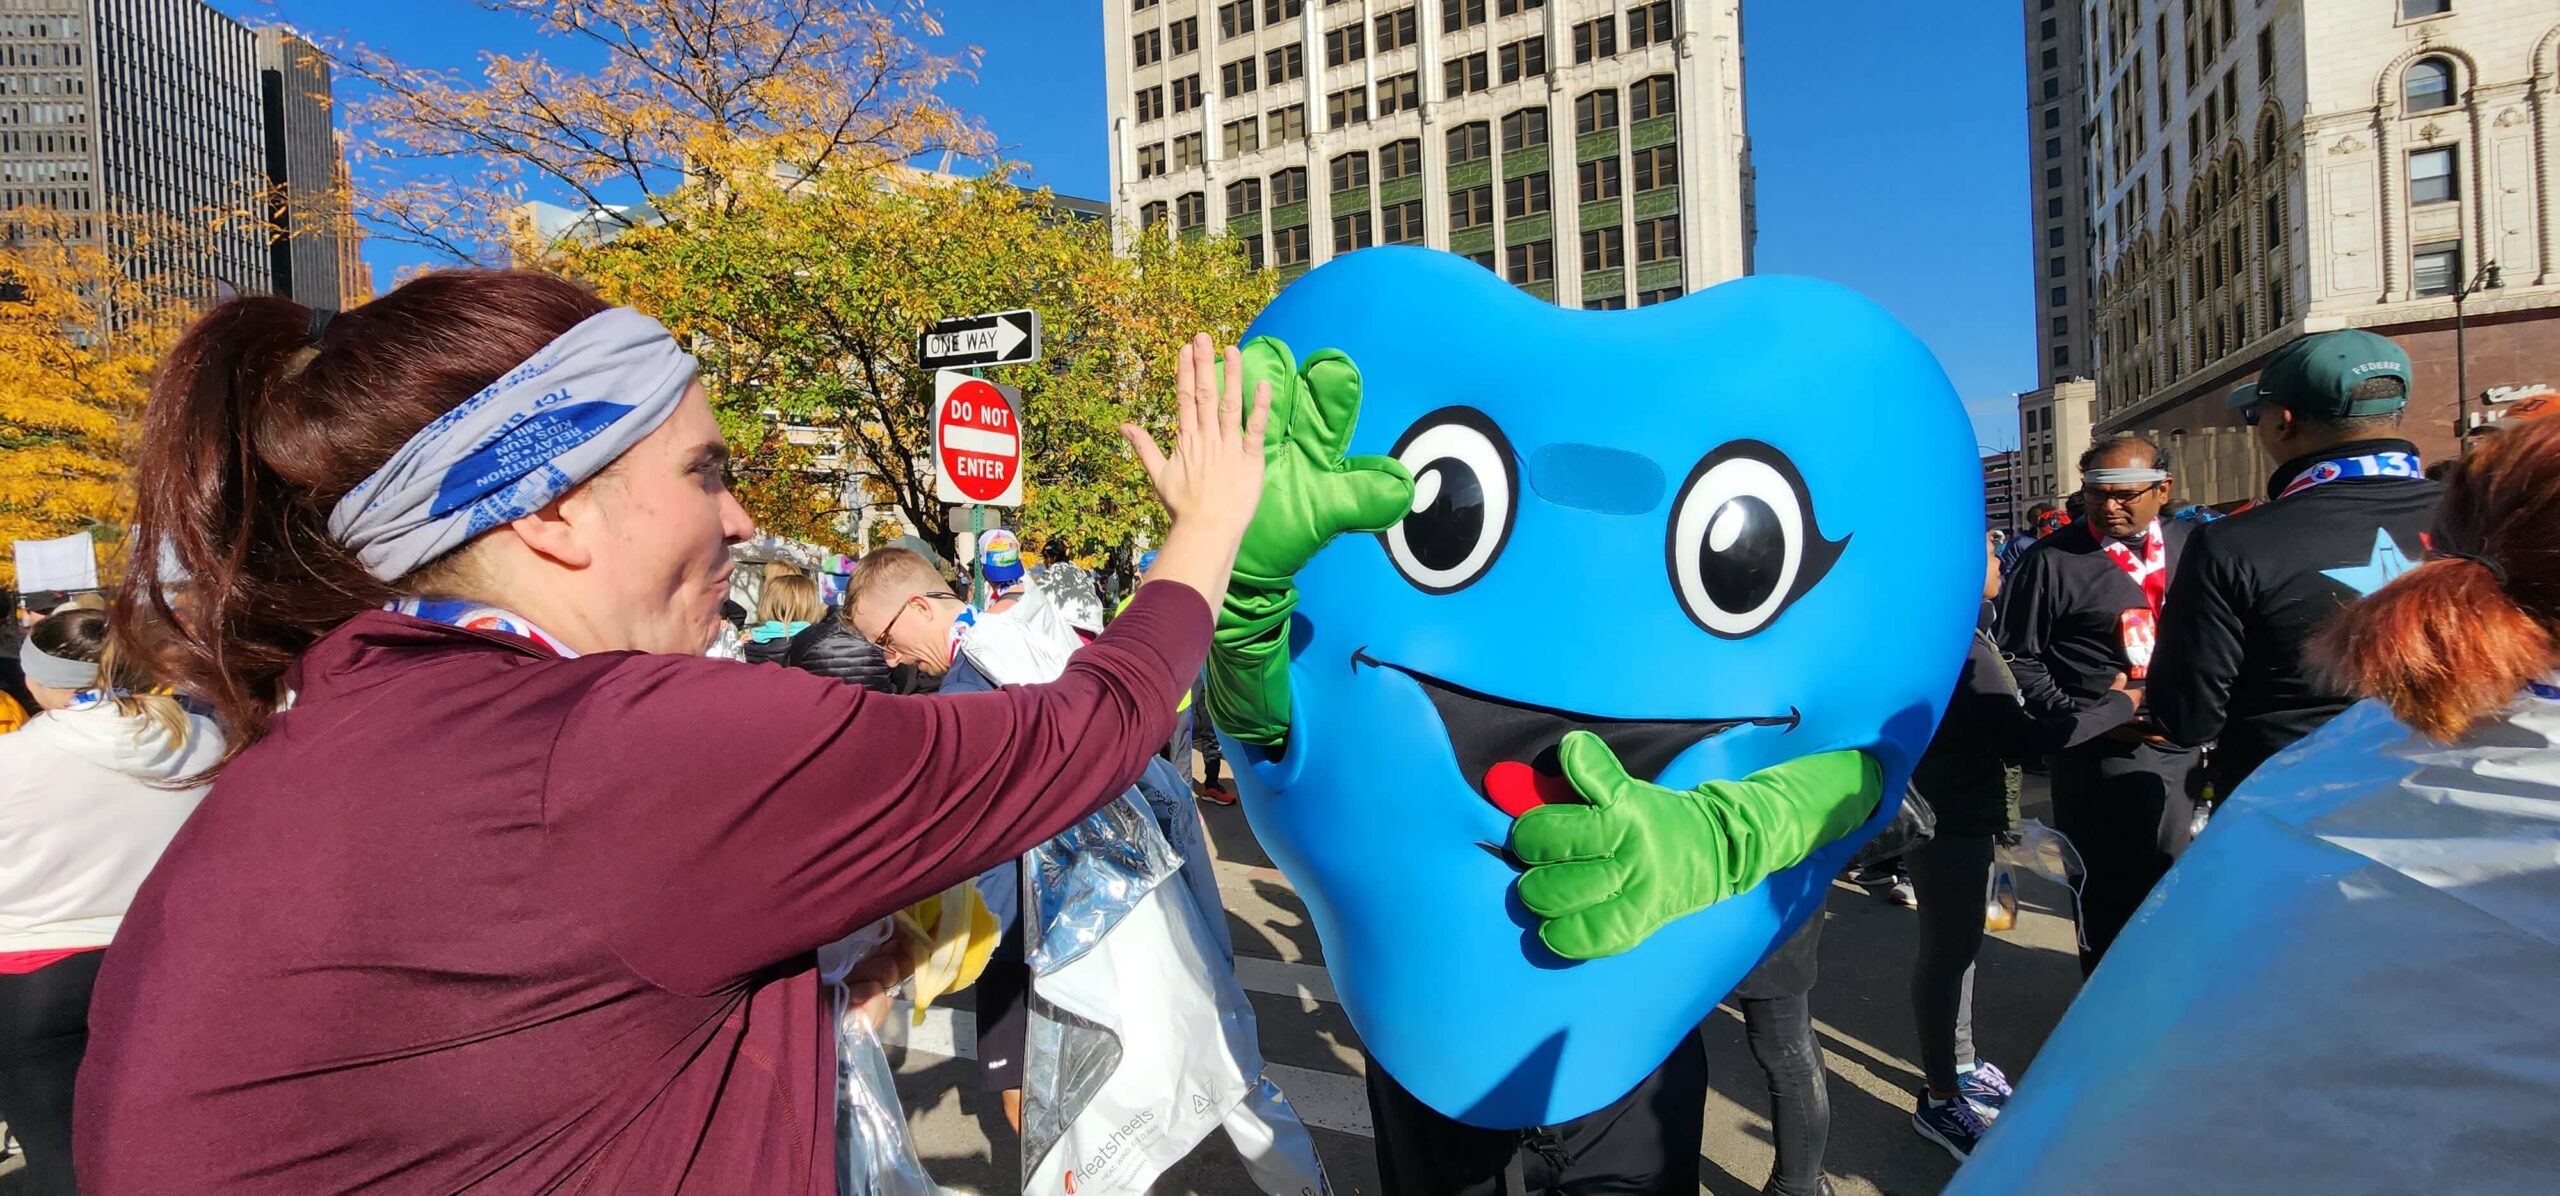 Hartley T. Heart, Gift of Life's chief mascot, gives a high five to a passing runner.